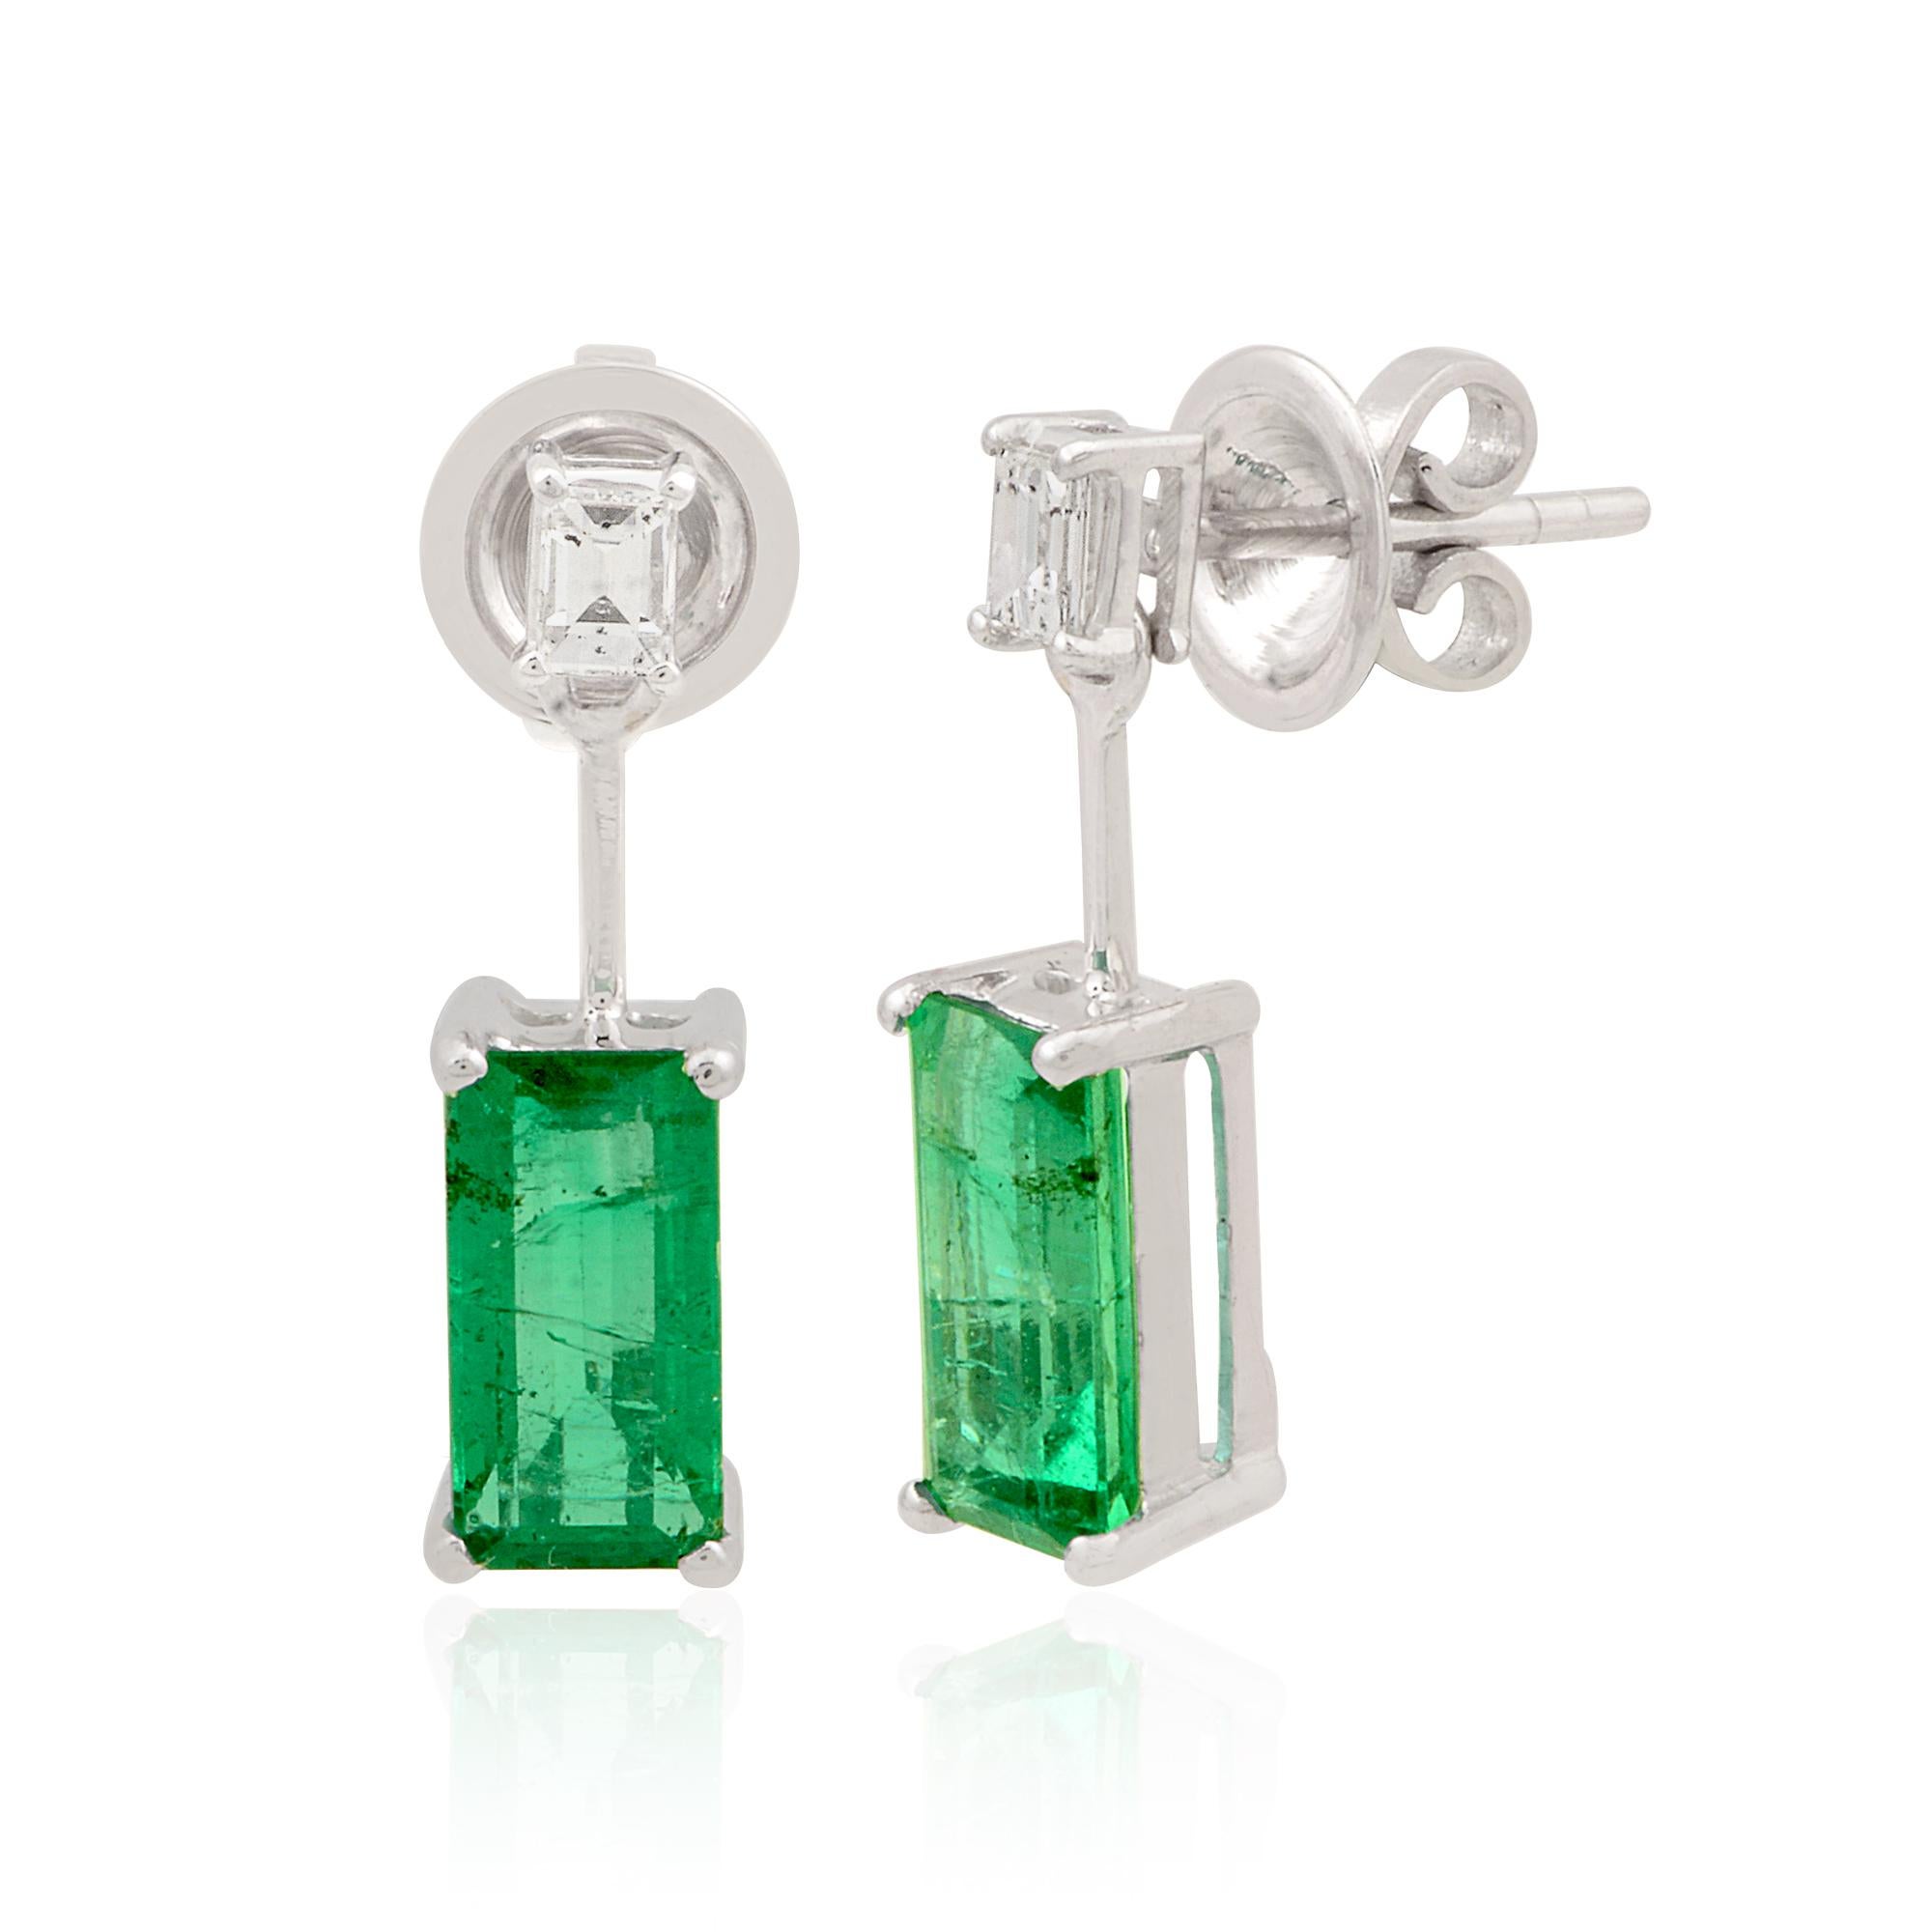 Item Code :- SEE-1829
Gross Wt :- 3.27 gm
18k White Gold Wt :- 2.67 gm
Diamond Wt :- 0.26 carat ( AVERAGE DIAMOND CLARITY SI1-SI2 & COLOR H-I )
Emerald Wt :- 2.74 carat 
Earrings Length :- 21 mm approx.
✦ Sizing
.....................
We can adjust